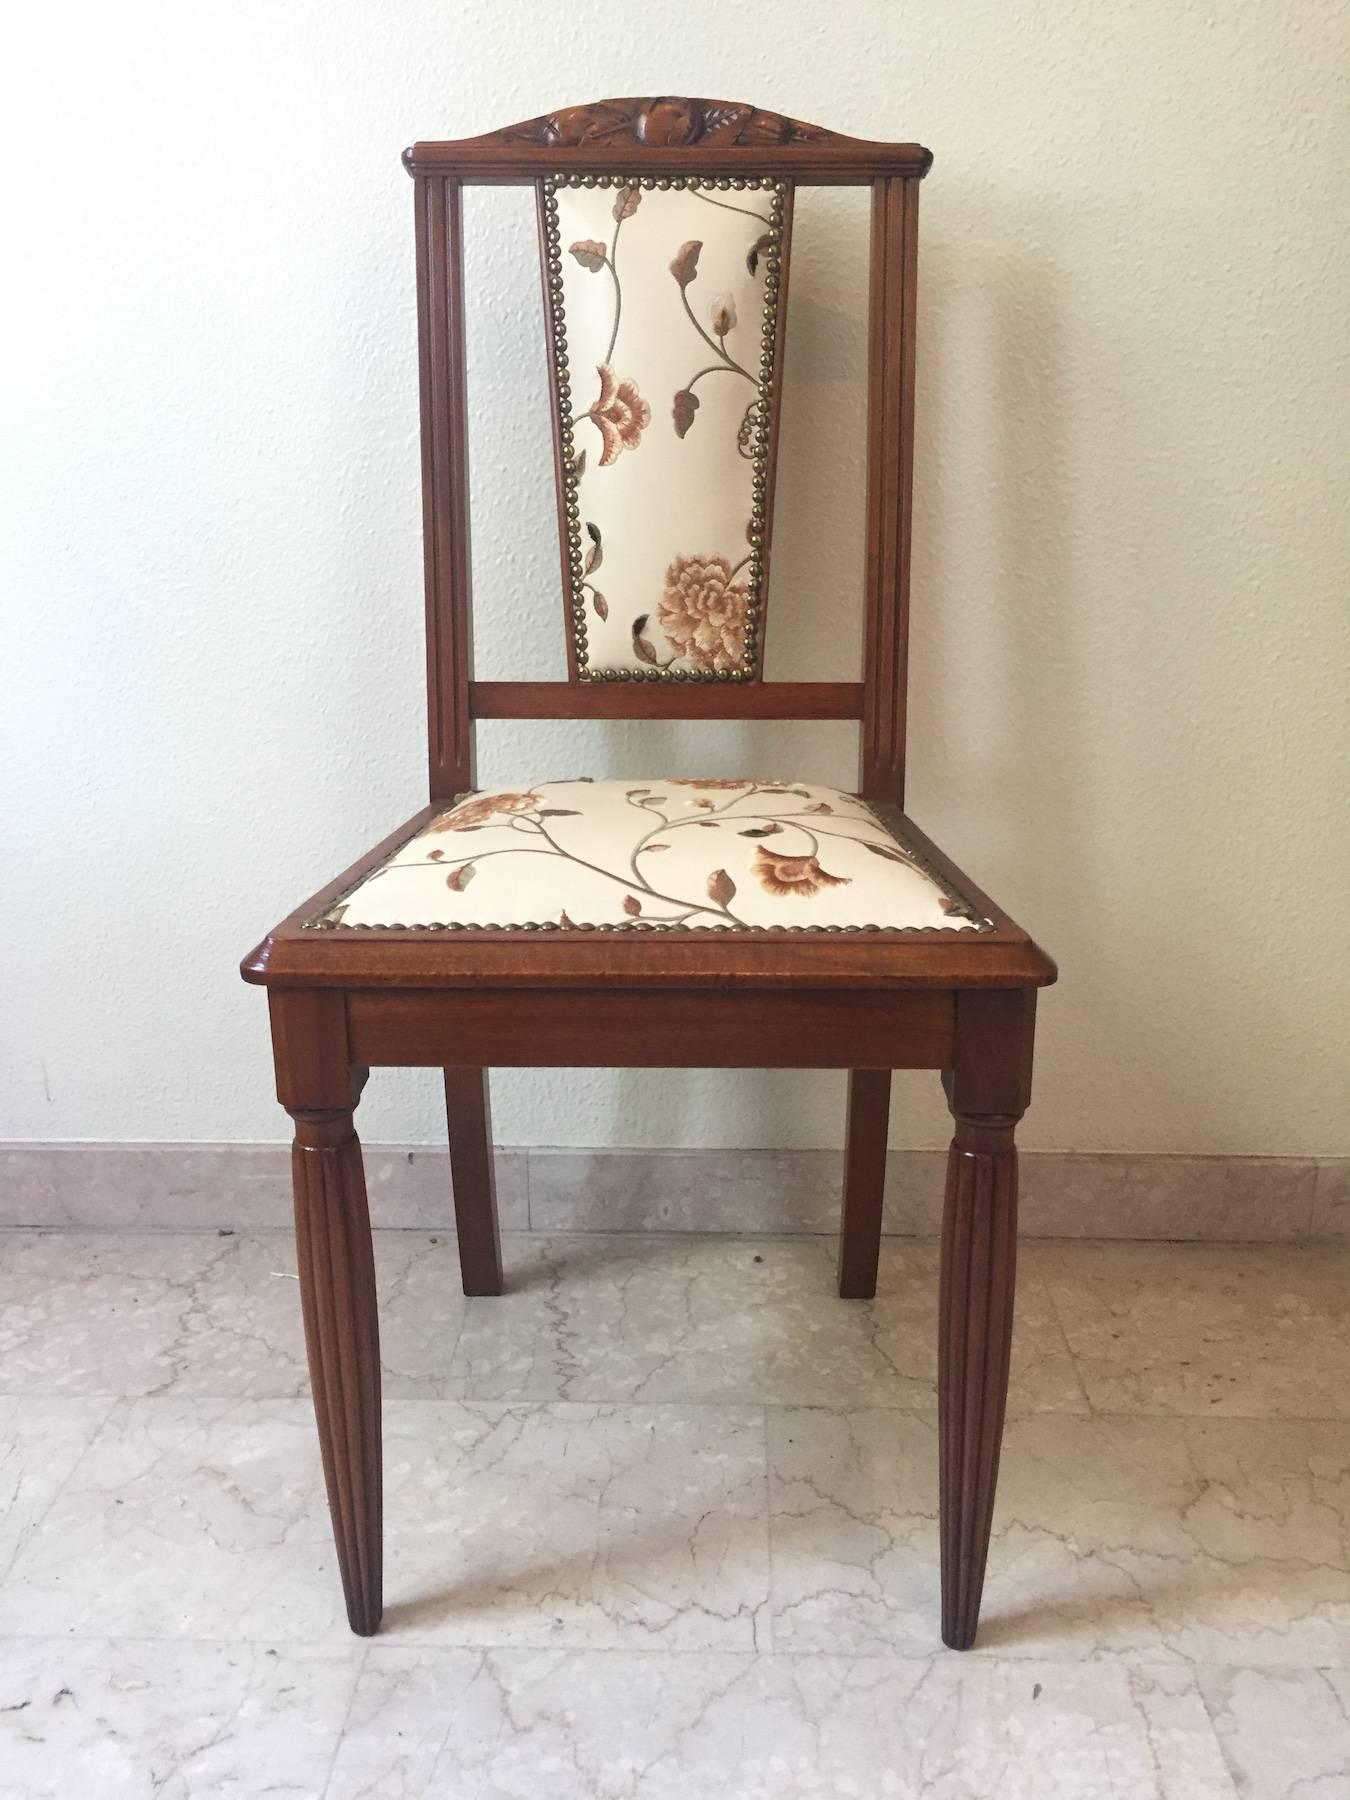 Beautiful French chairs in walnut with decorative inlays on the backs, grooved legs, new upholstery in faux leather with embossed plant motifs.